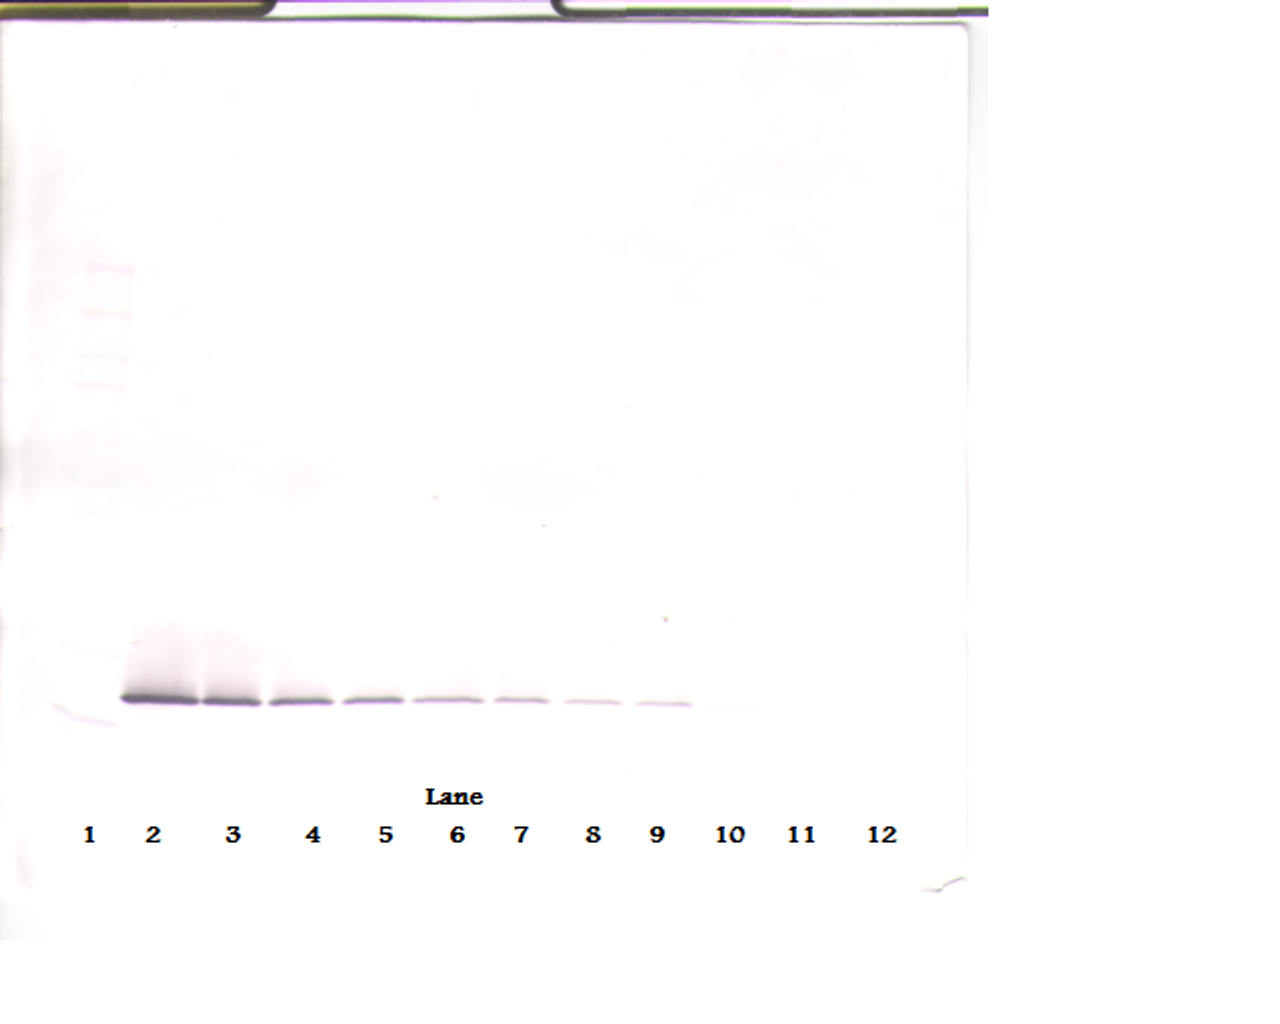 To detect hEndostatin by Western Blot analysis this antibody can be used at a concentration of 0.1 - 0.2 ug/ml. Used in conjunction with compatible secondary reagents the detection limit for recombinant hEndostatin is 1.5 - 3.0 ng/lane, under either reducing or non-reducing conditions.